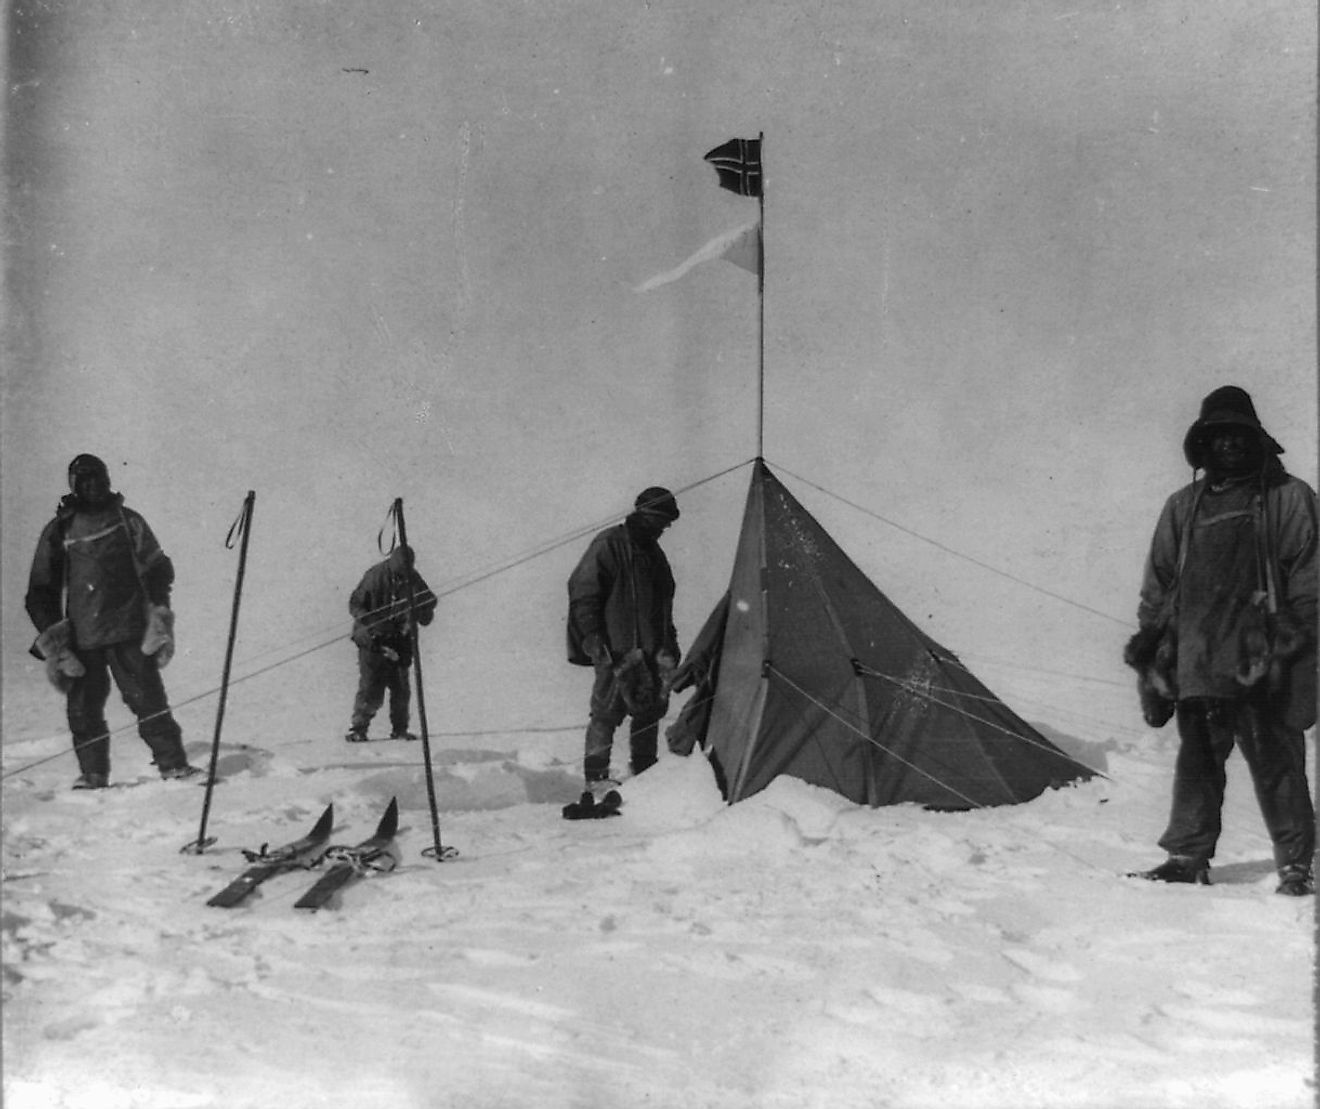 Members of the ill-fated Terra Nova expedition at the South Pole.